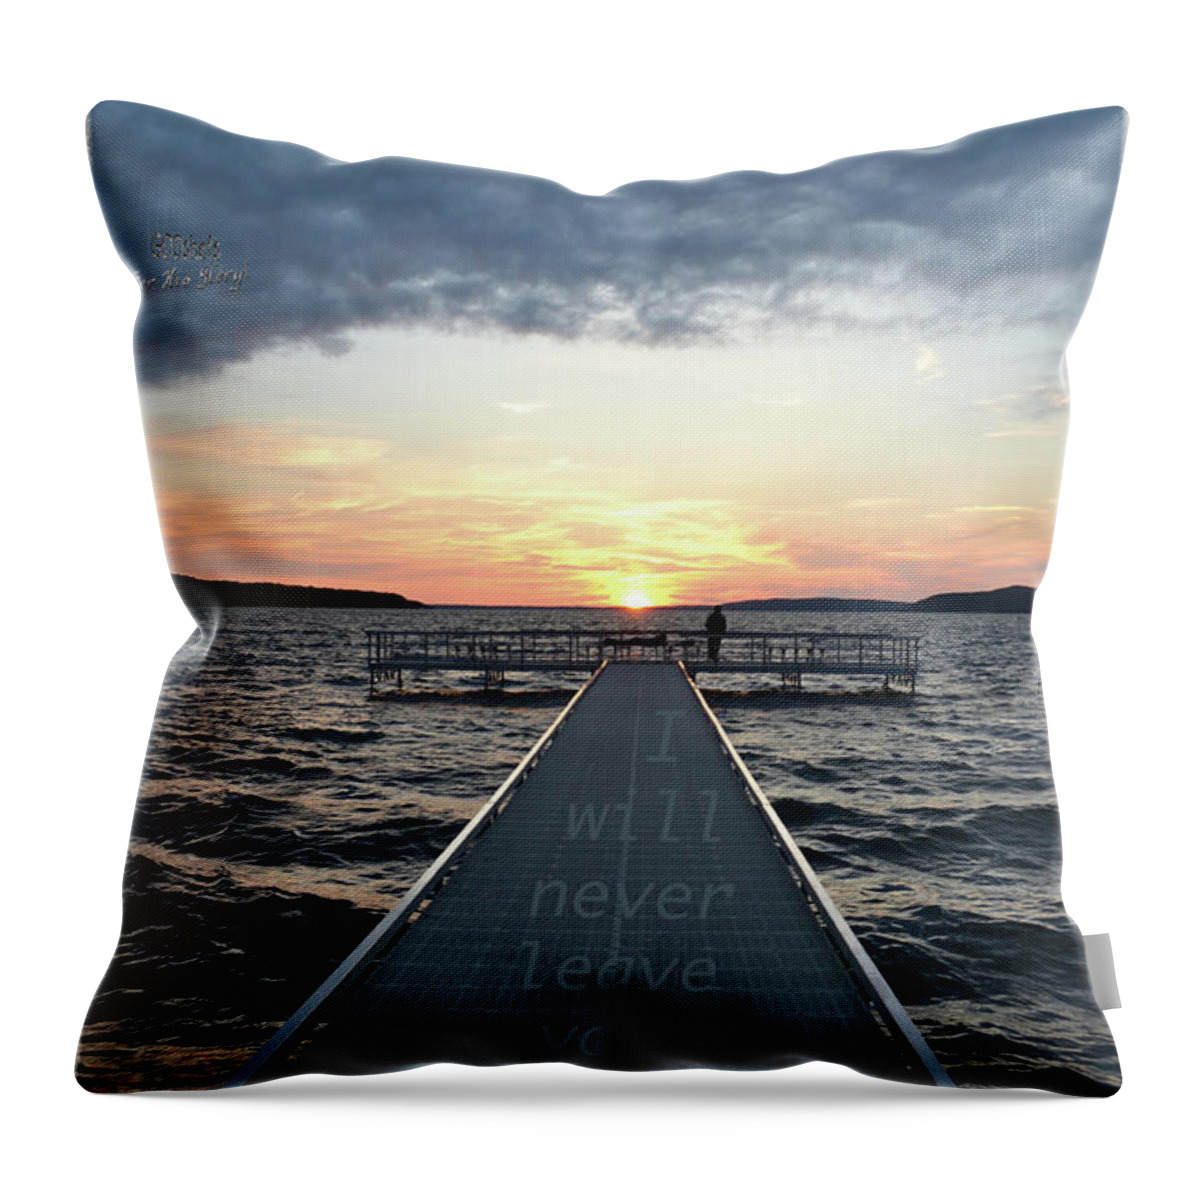  Throw Pillow featuring the mixed media With you always by Lori Tondini